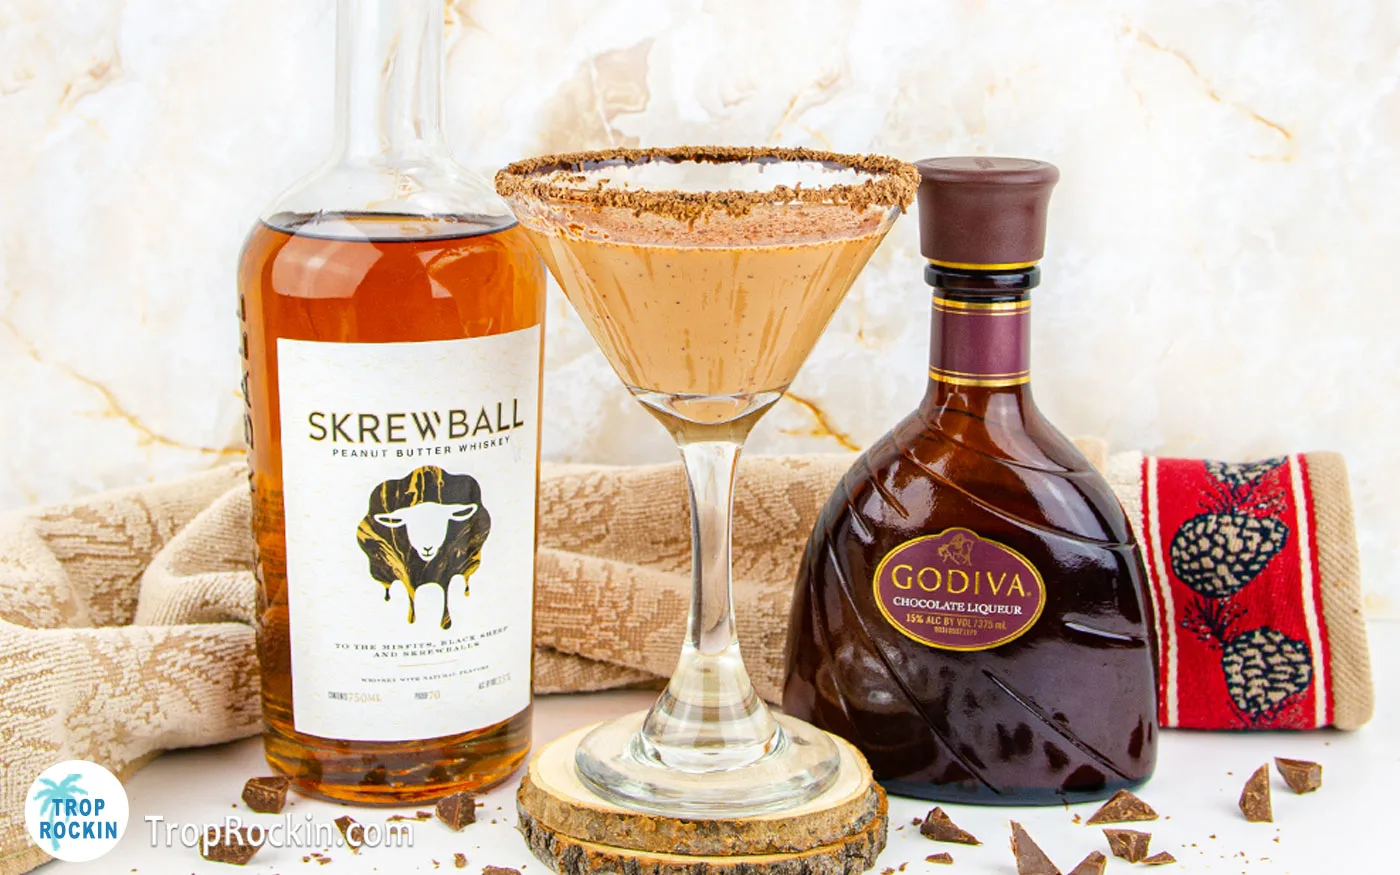 Peanut Butter Whiskey Drink in a martini glass with a bottle of Skrewball Whiskey and a Bottle of Godiva Chocolate Liqueur in the background.